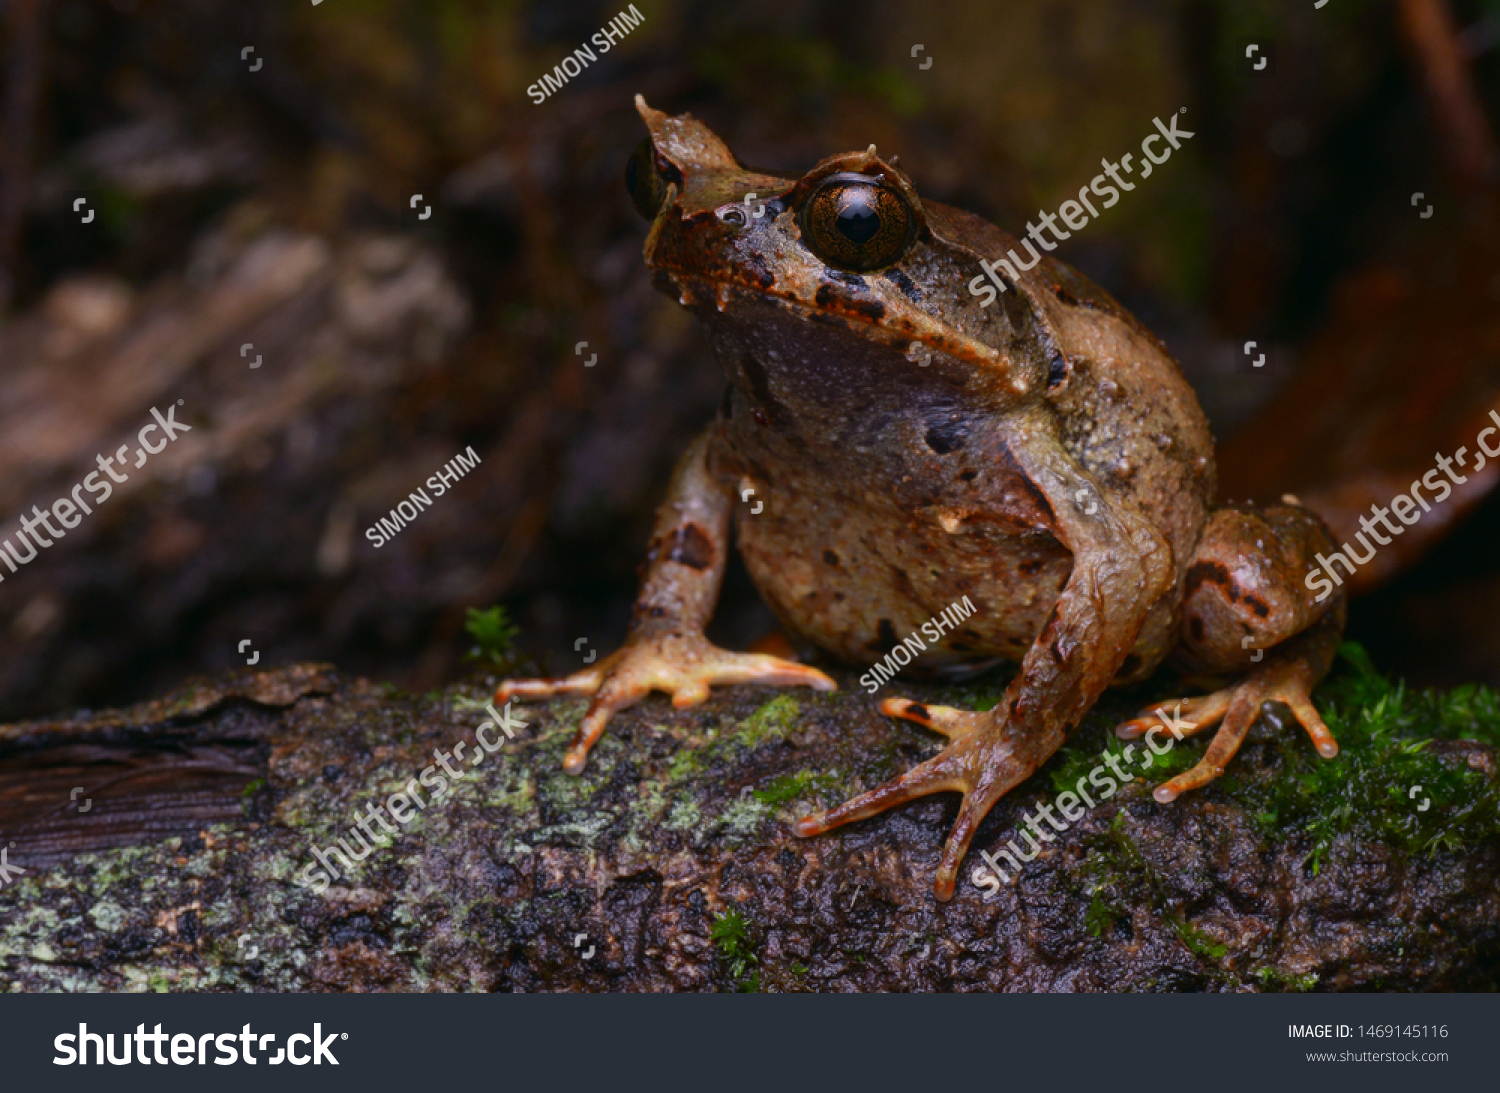 close up image of a Kinabalu Horned Frog - Xenophrys baluensis #1469145116